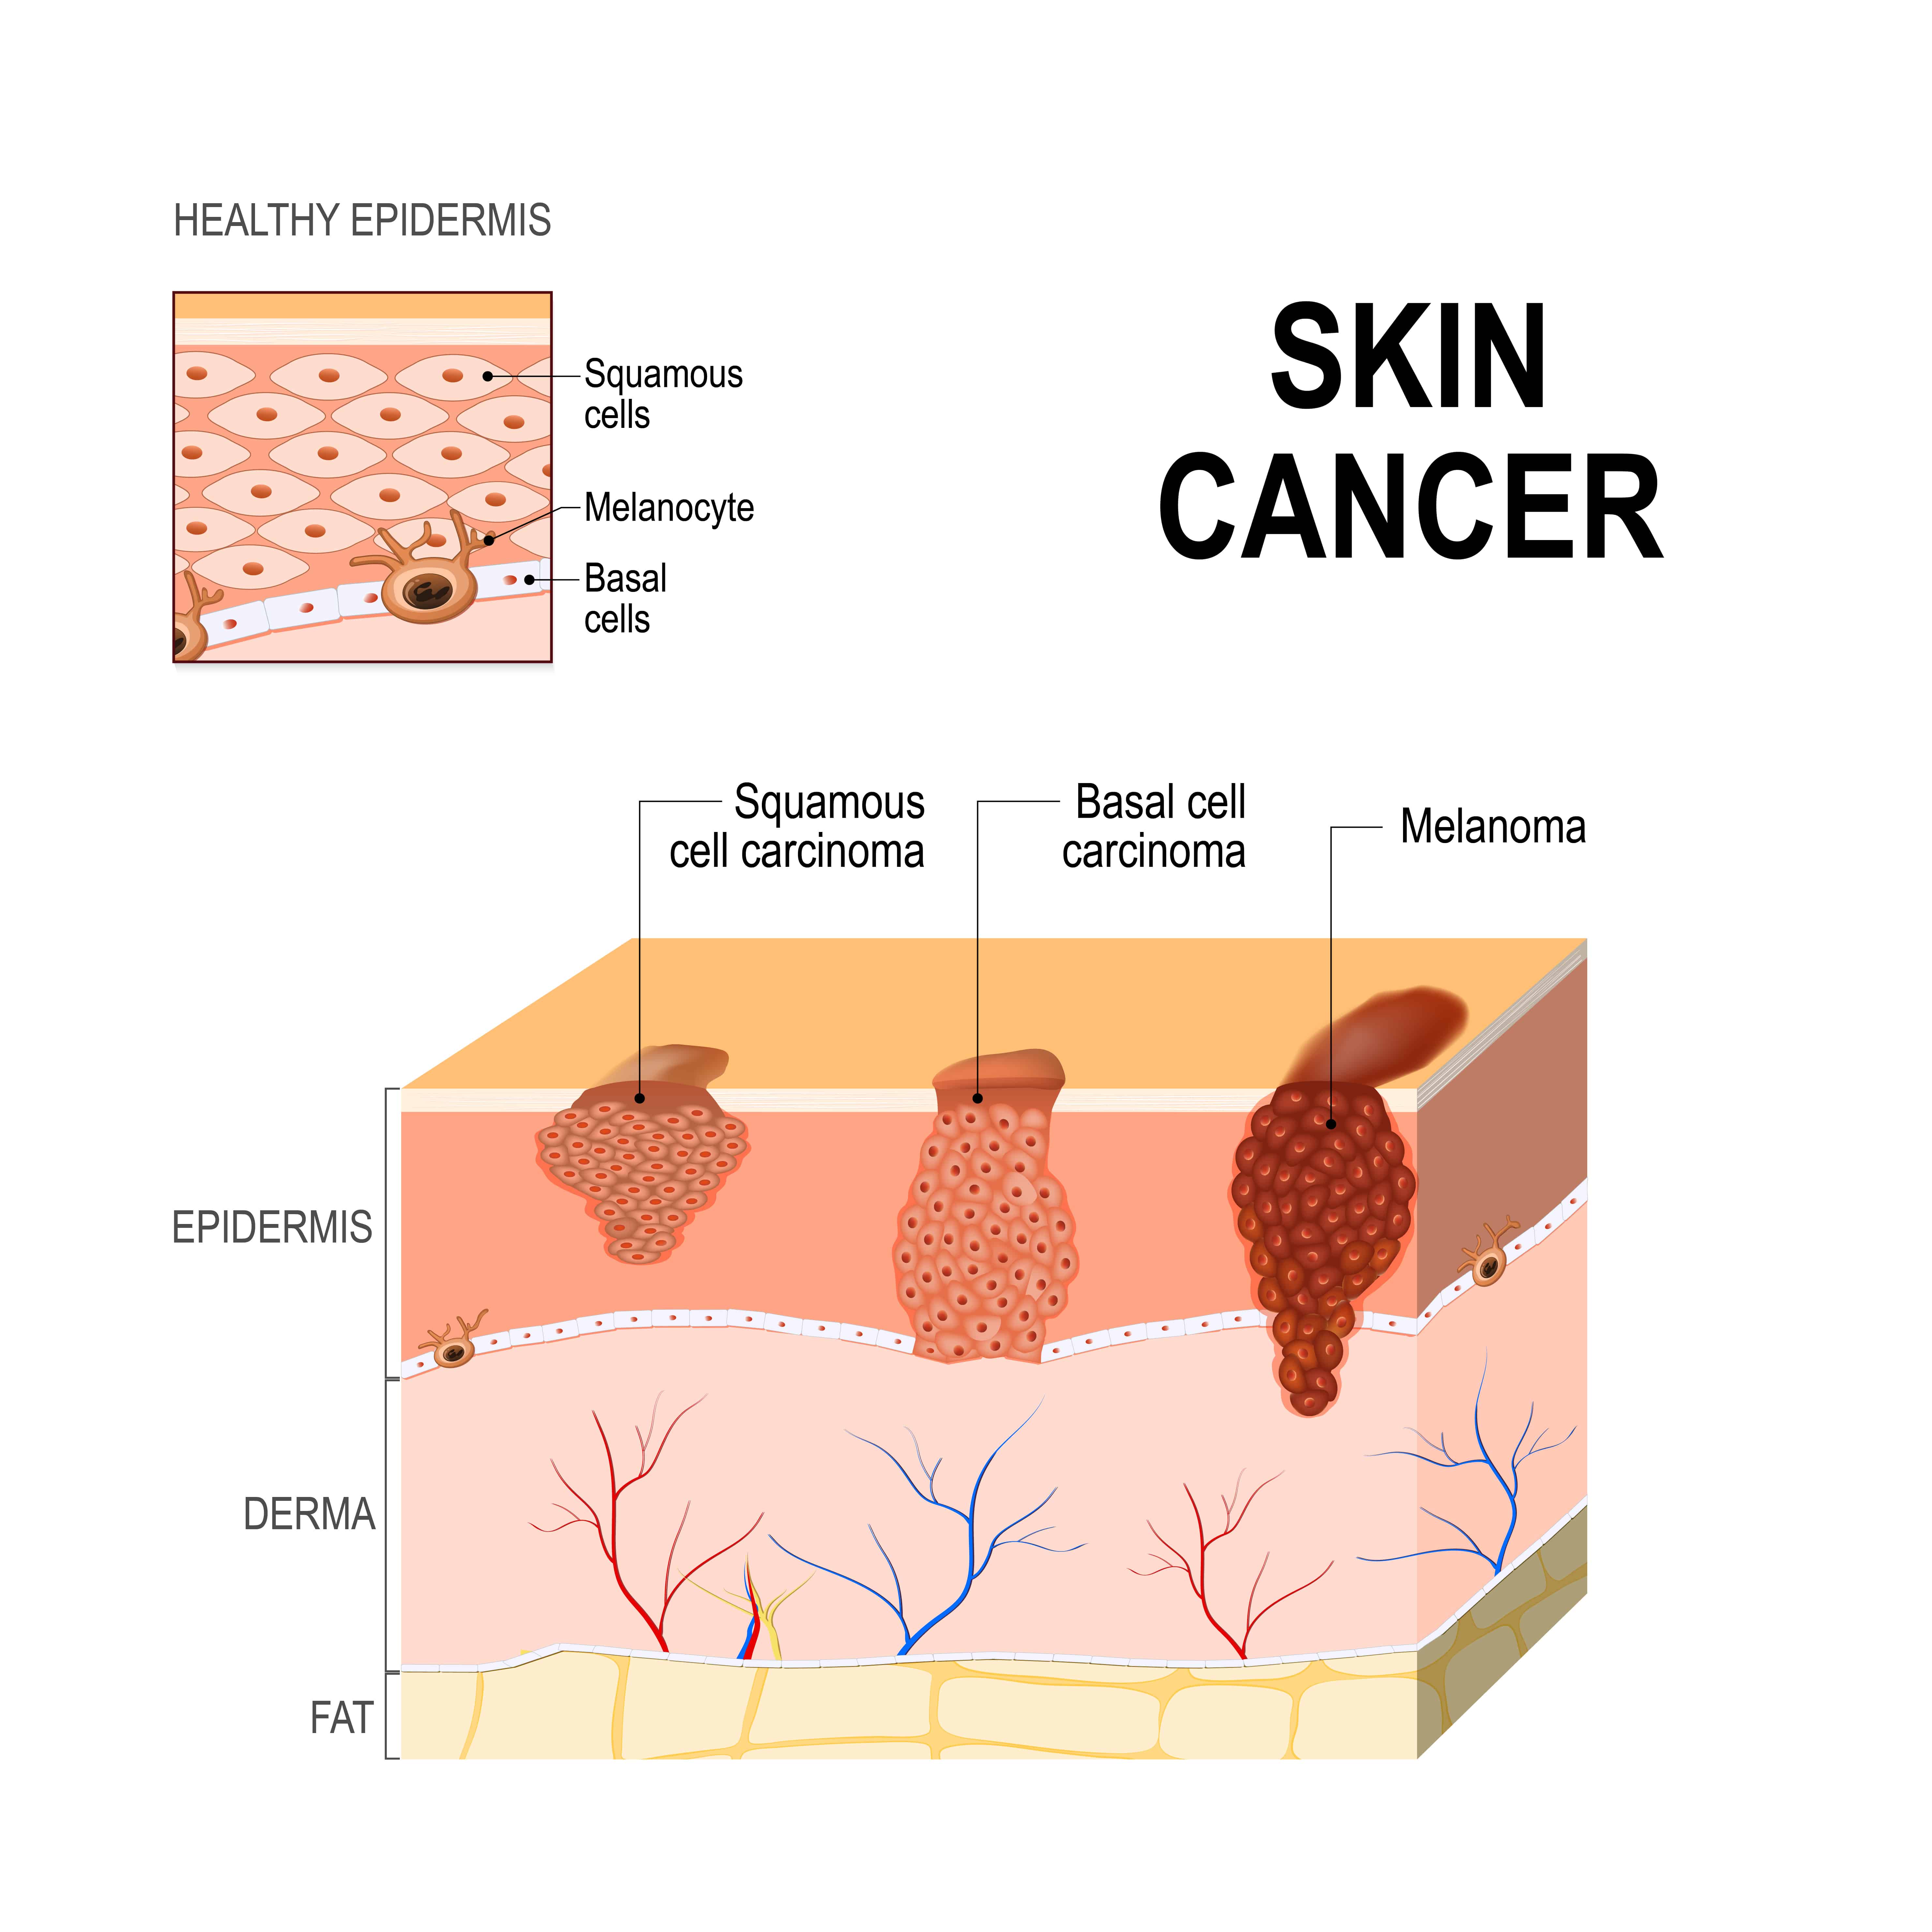 What Are The Best Essential Oils And Recipes For Skin Cancer? Essential Oil Benefits